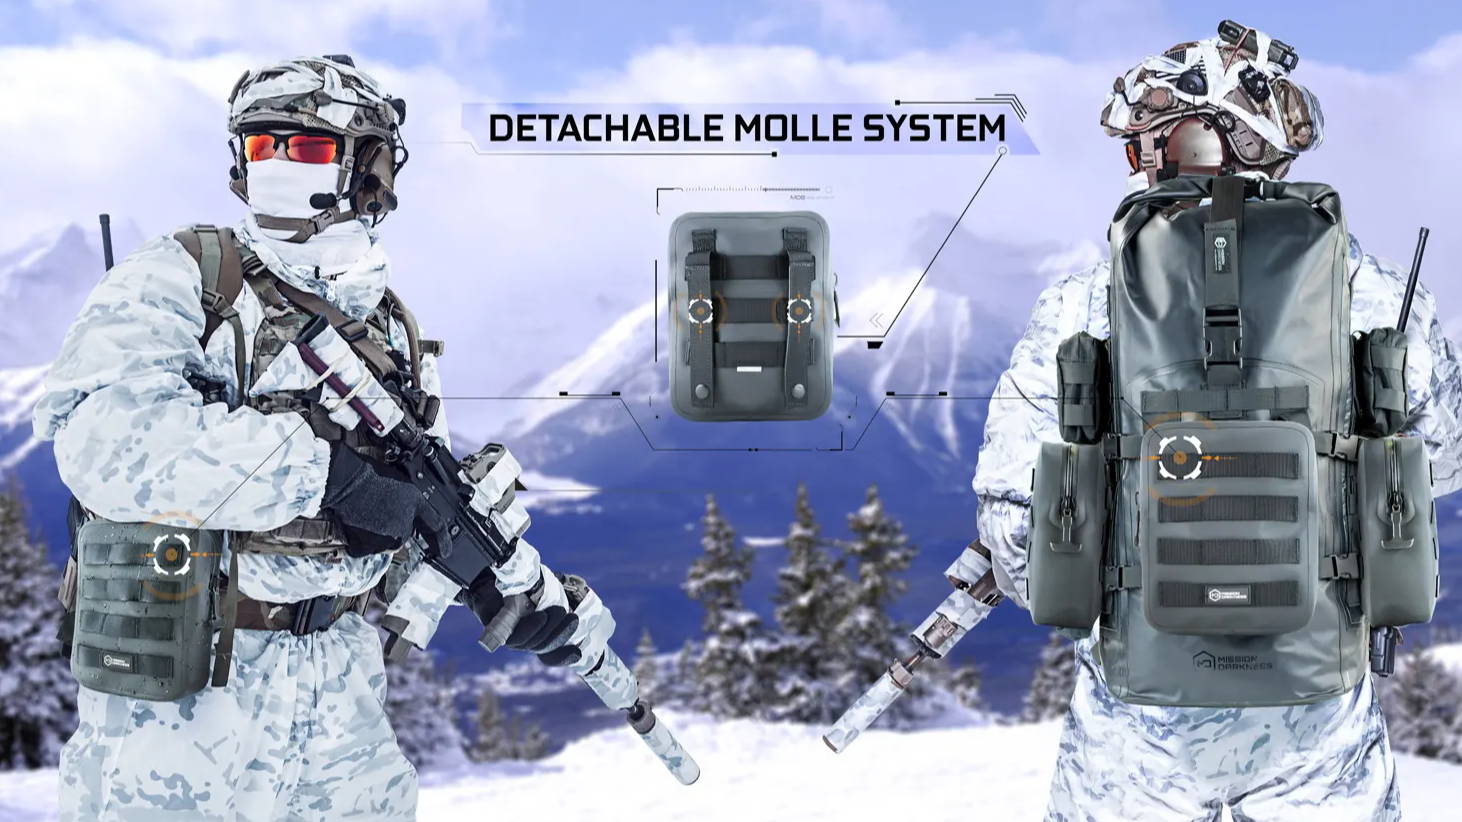 Mission Darkness Dry Shield MOLLE Faraday Pouch detachable system isolates mobile devices and repels water